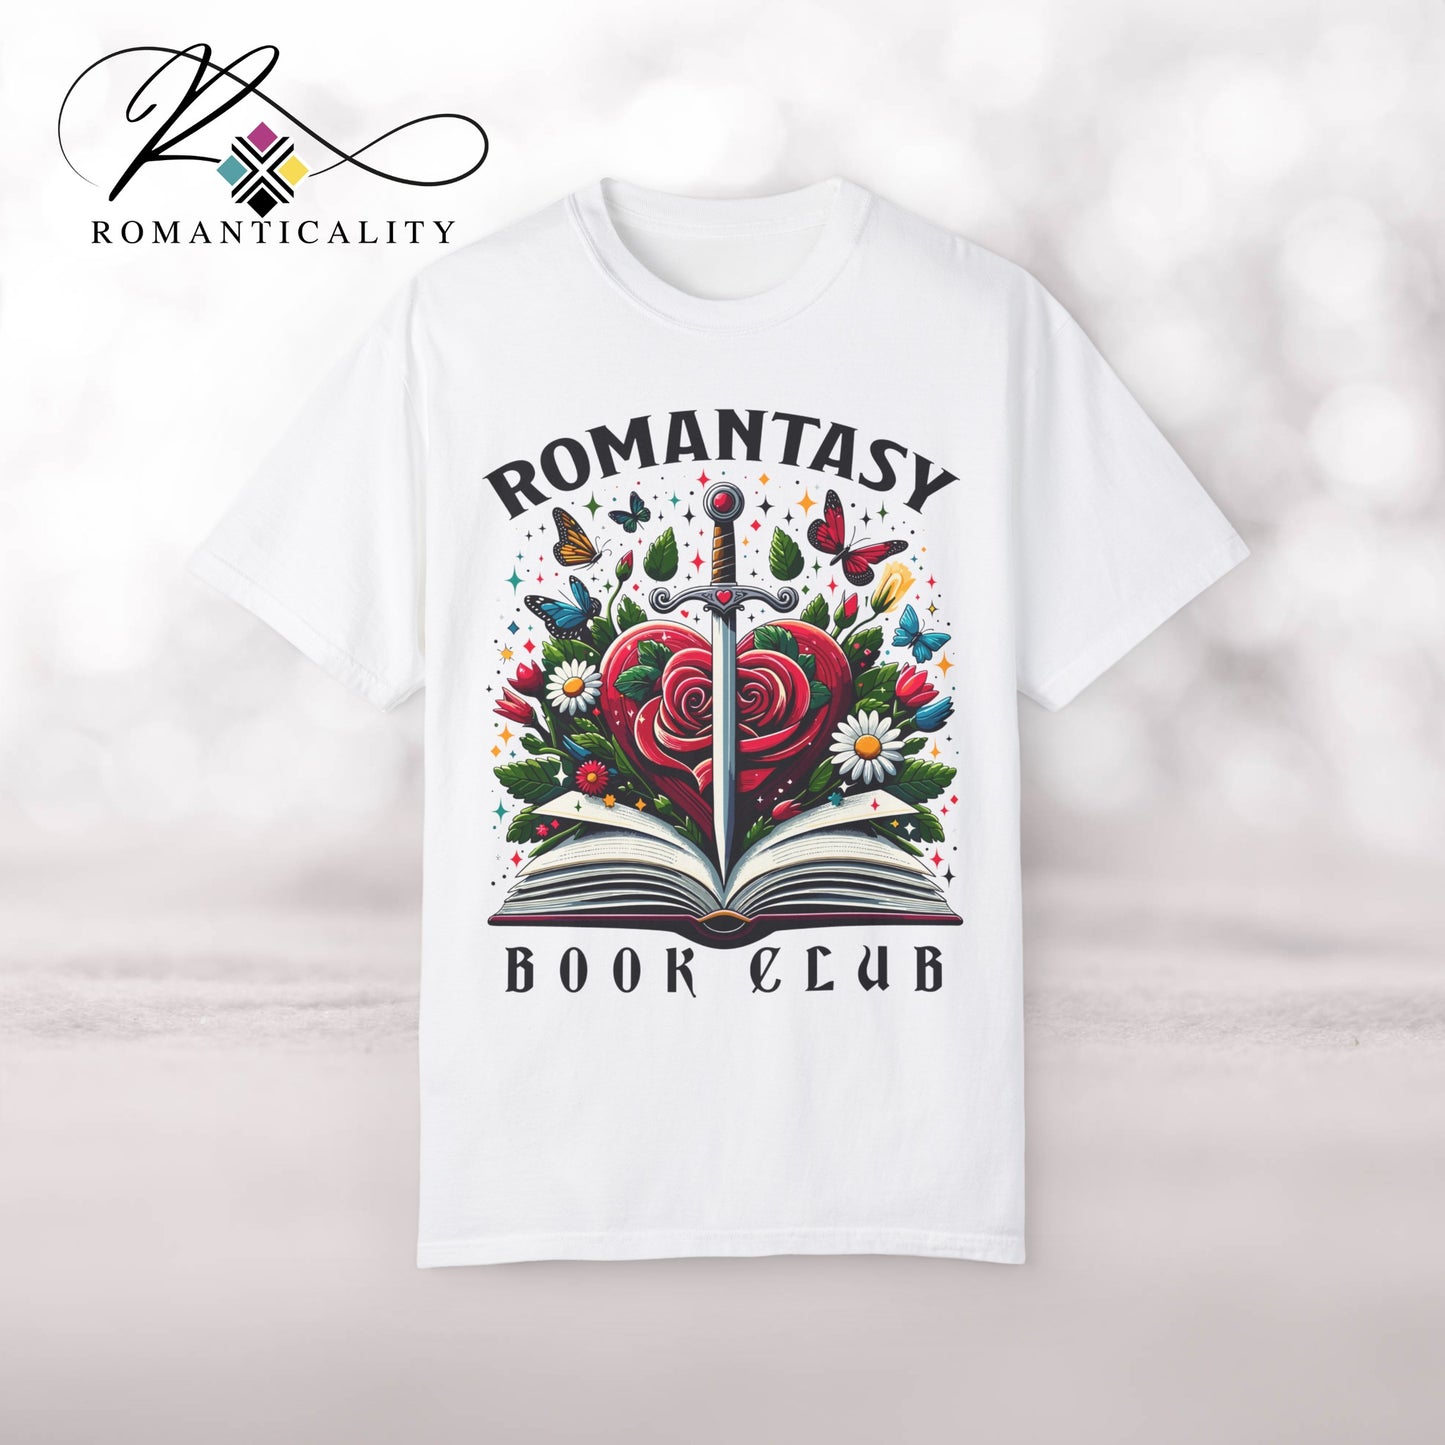 Romantic Book Shirt-Comfort & Amazing Colors-For Romance Book Lovers-Booktokers-Bookstagram-Smut Lovers-Book Lovers-Gift Readers/Writers